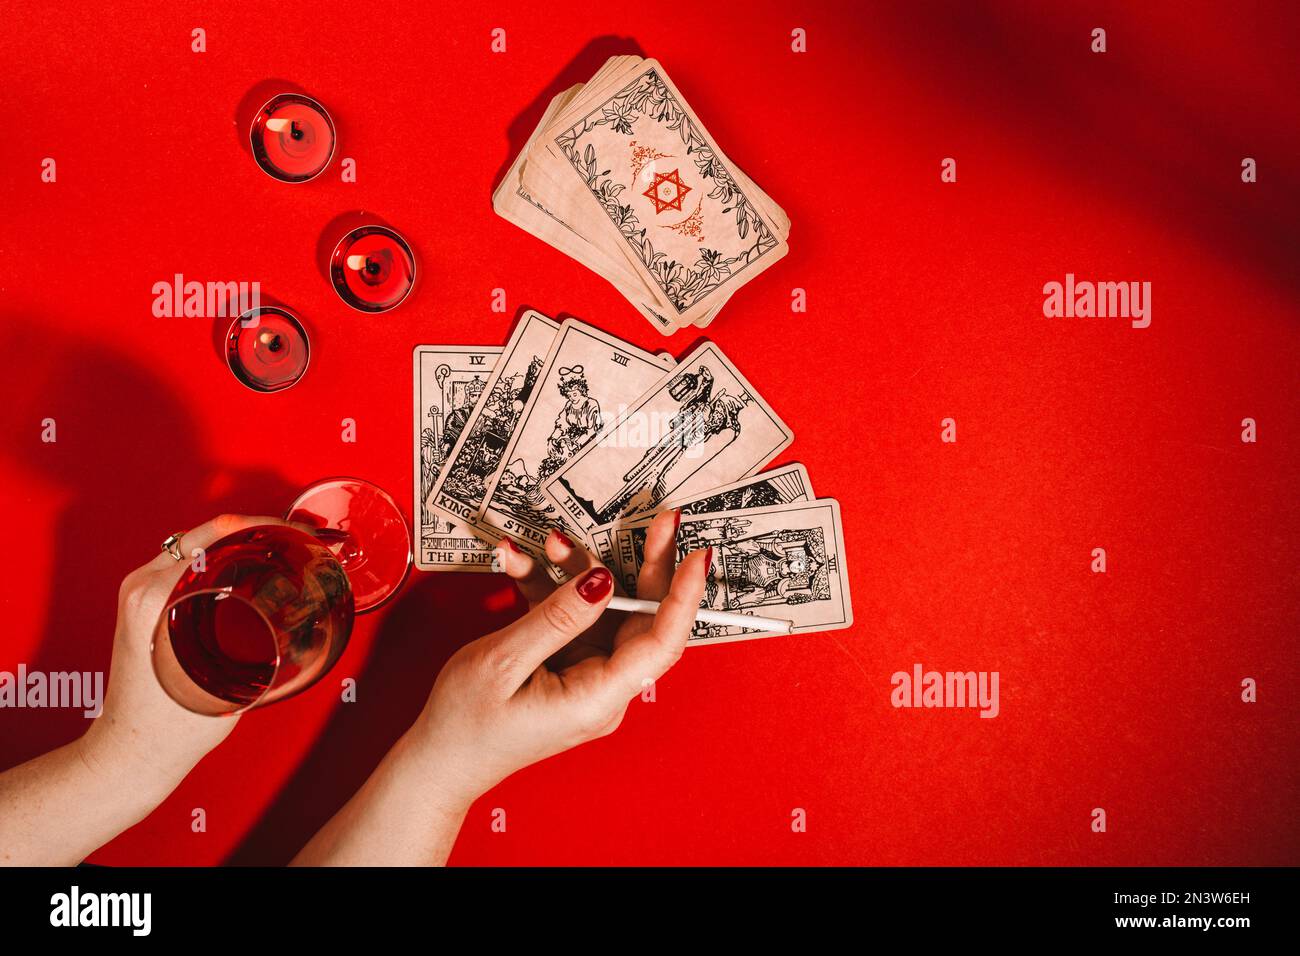 Esoteric composition top view with female hands of fortune teller with cigarette and glass of red wine reading Tarot cards on red background with Stock Photo